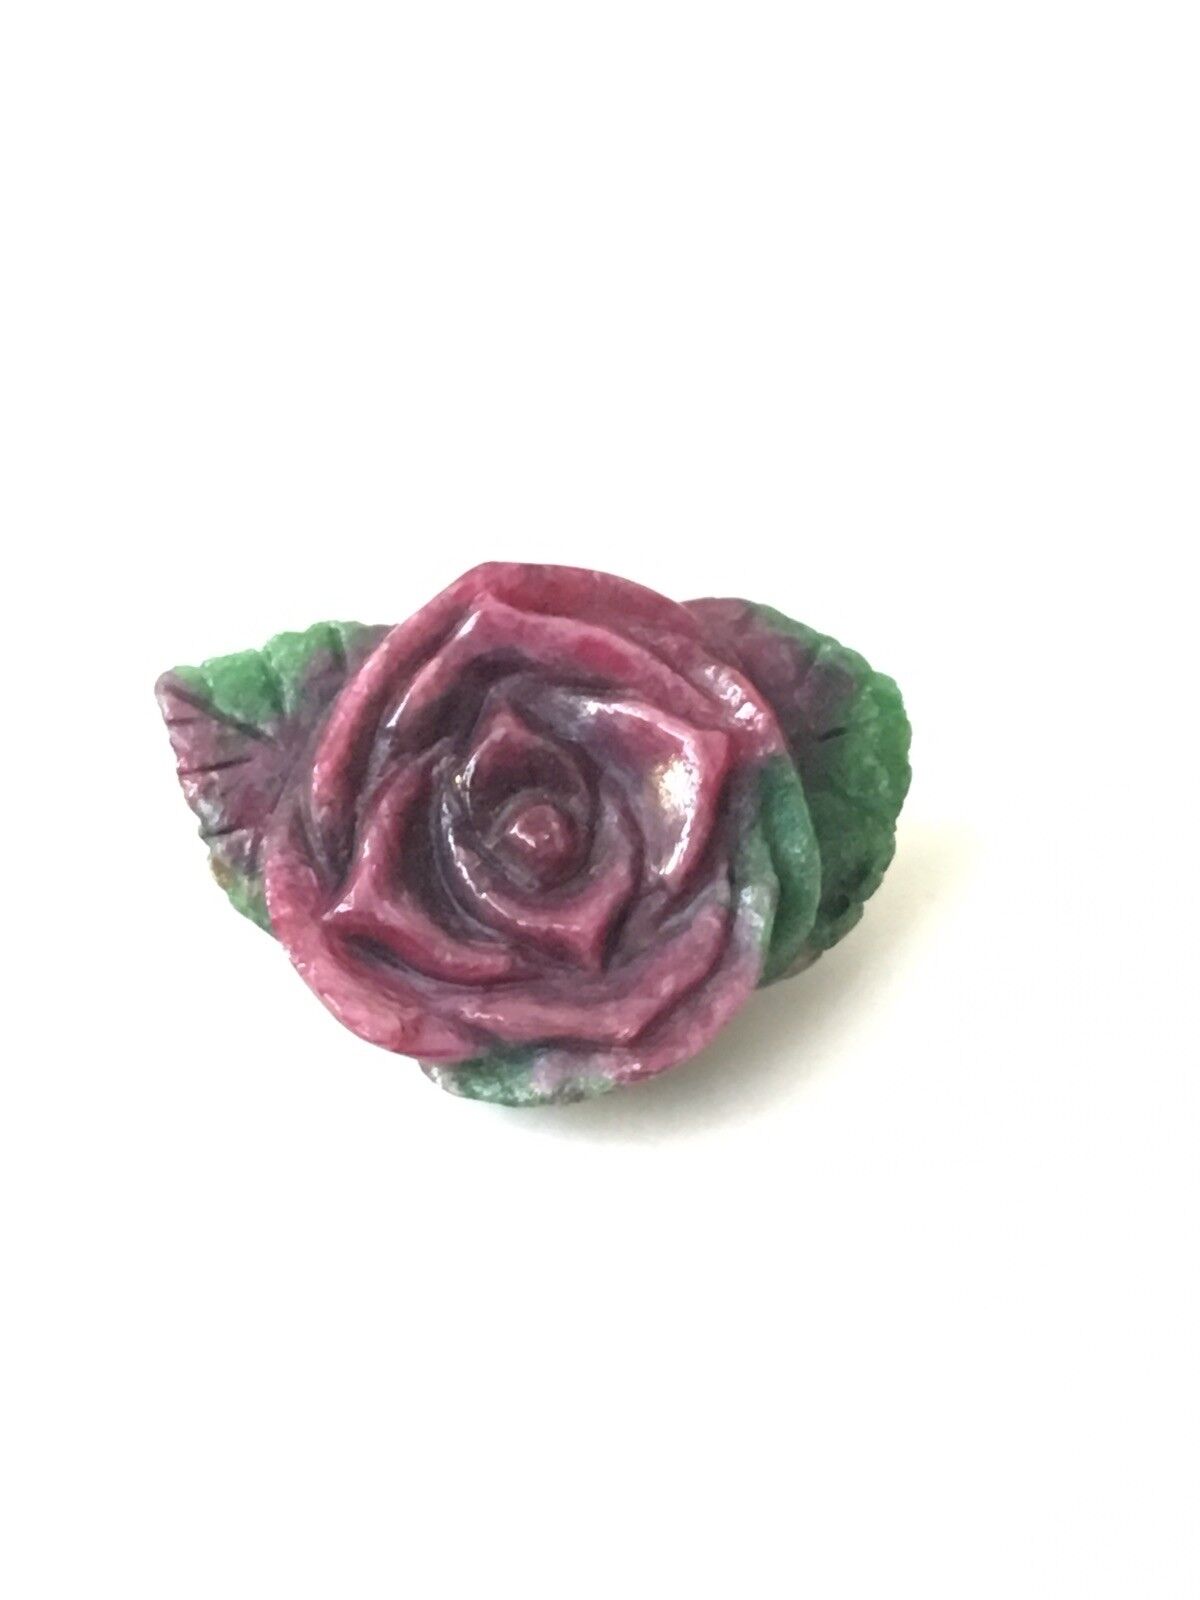 Ruby In Zoisite Natural Stone Rose Flower (79ct)